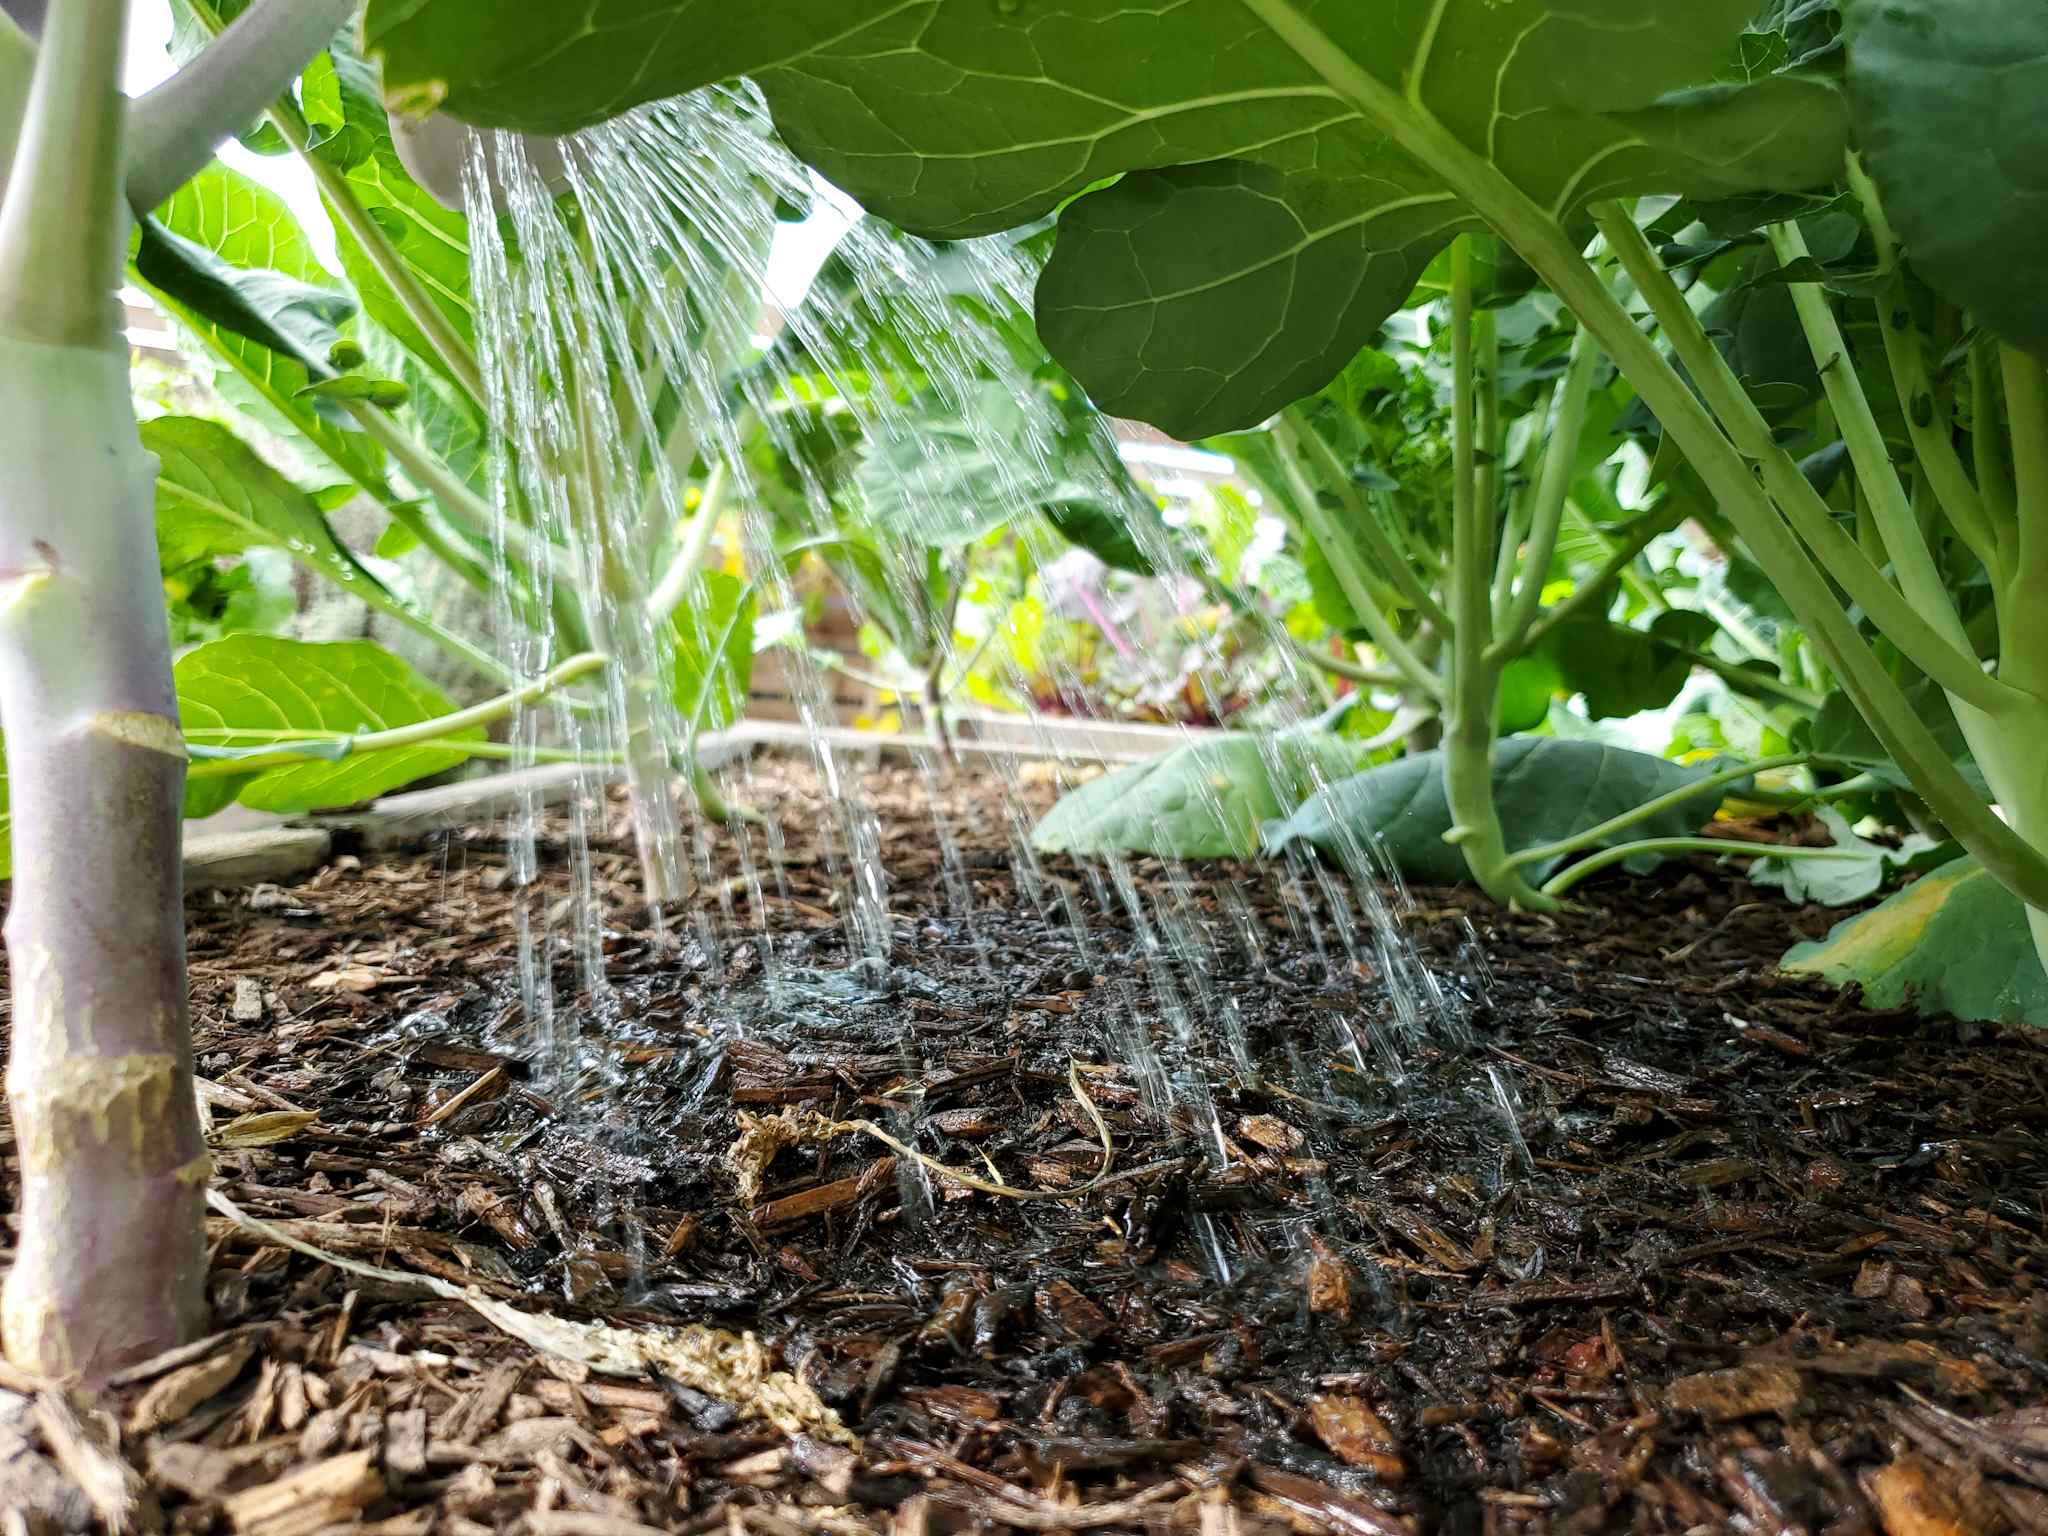 The understory of a garden bed containing many veggies is shown. There is a watering can dispersing water onto the soil around the vegetables. This illustrates when using rain water it is best to be sure to water the soil and not the plants themselves, just in case the water is contaminated with something from either the roof or water storage tank itself. 